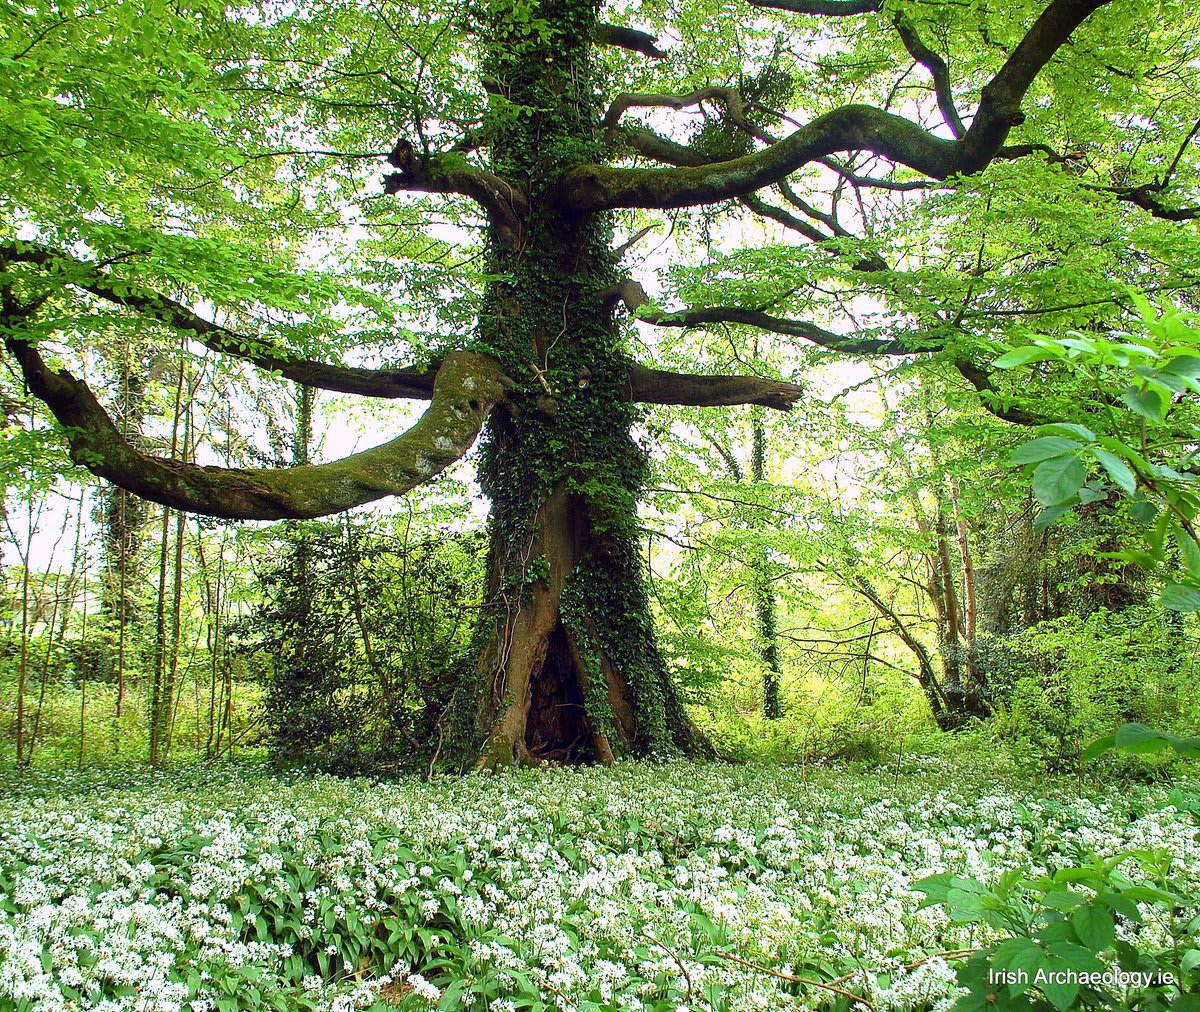 A magnificent old beech tree surrounded by wild garlic. Hollow inside, it must be a couple of 100 years old